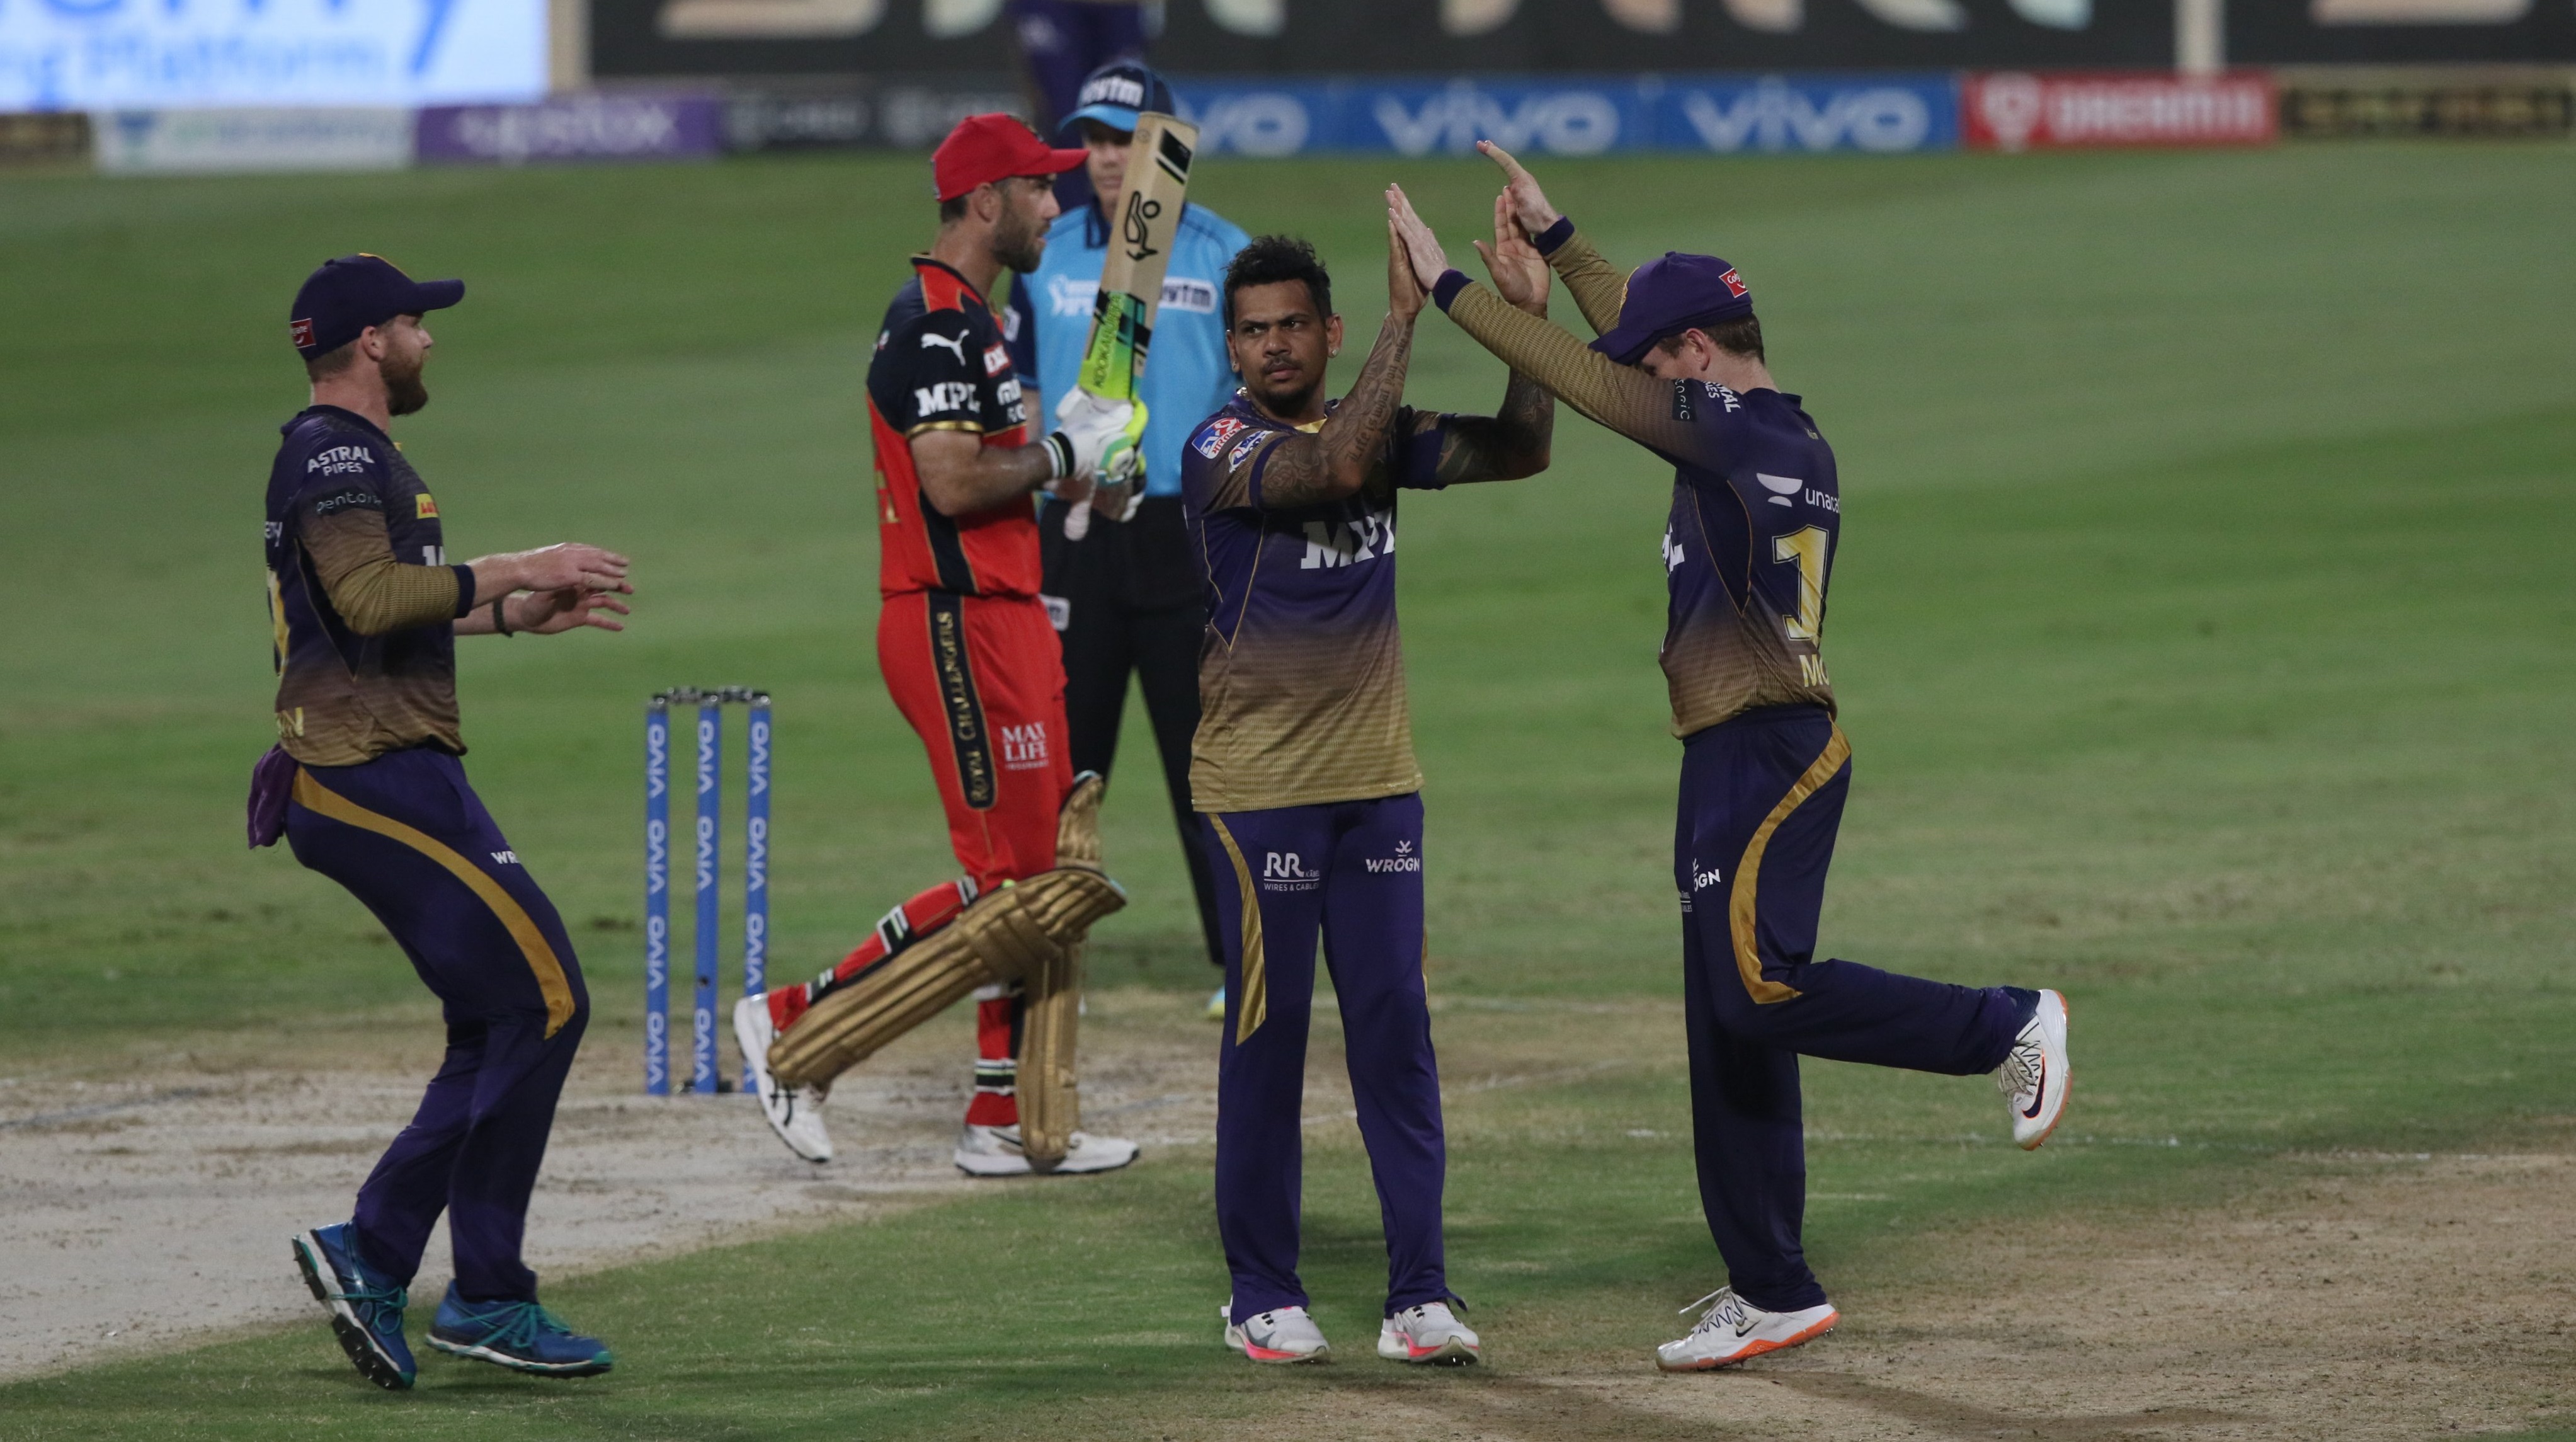 RCB vs KKR | Twitter reacts as Sunil Narine hunts down Kohli, de Villiers and Maxwell in a top-class spell